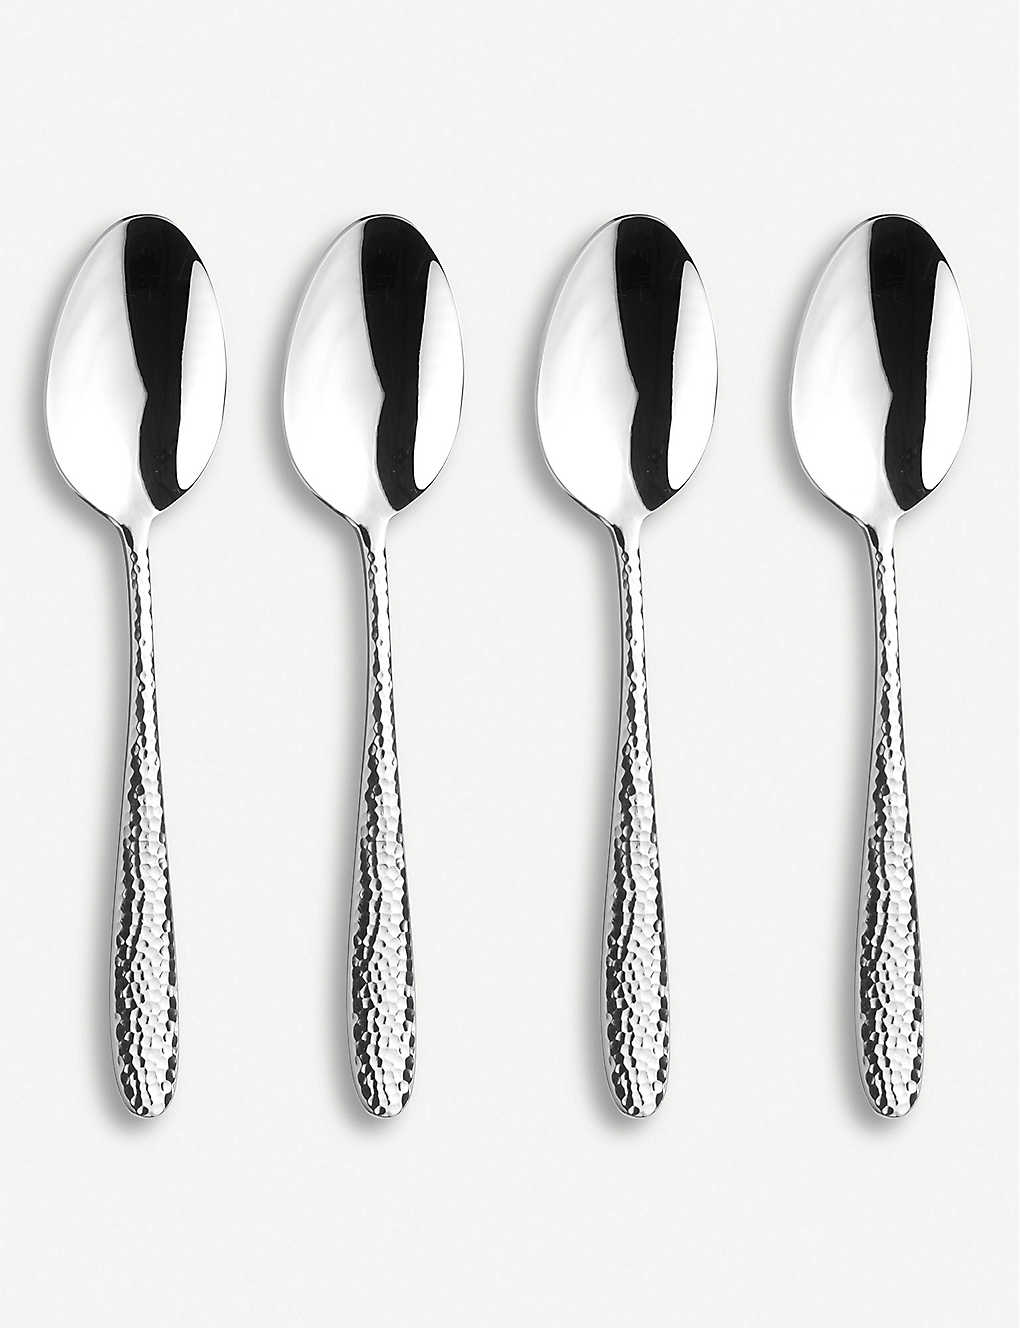 Arthur Price Mirage Stainless Steel Cutlery Set Of Four Serving Spoons